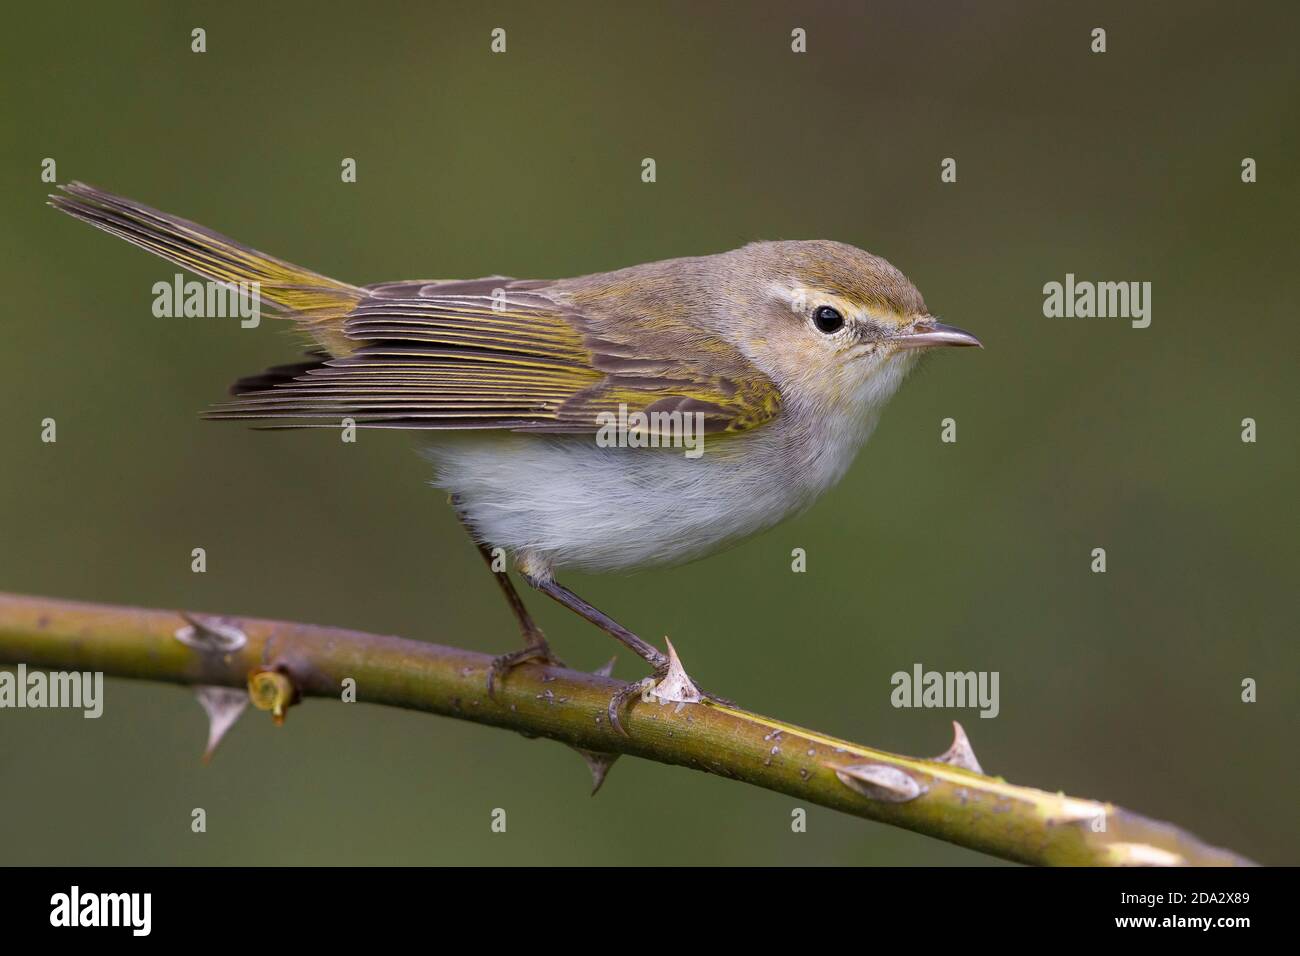 bonelli's warbler (Phylloscopus bonelli), adult perched on a branch with thorns, Italy, Passo della Raticosa Stock Photo